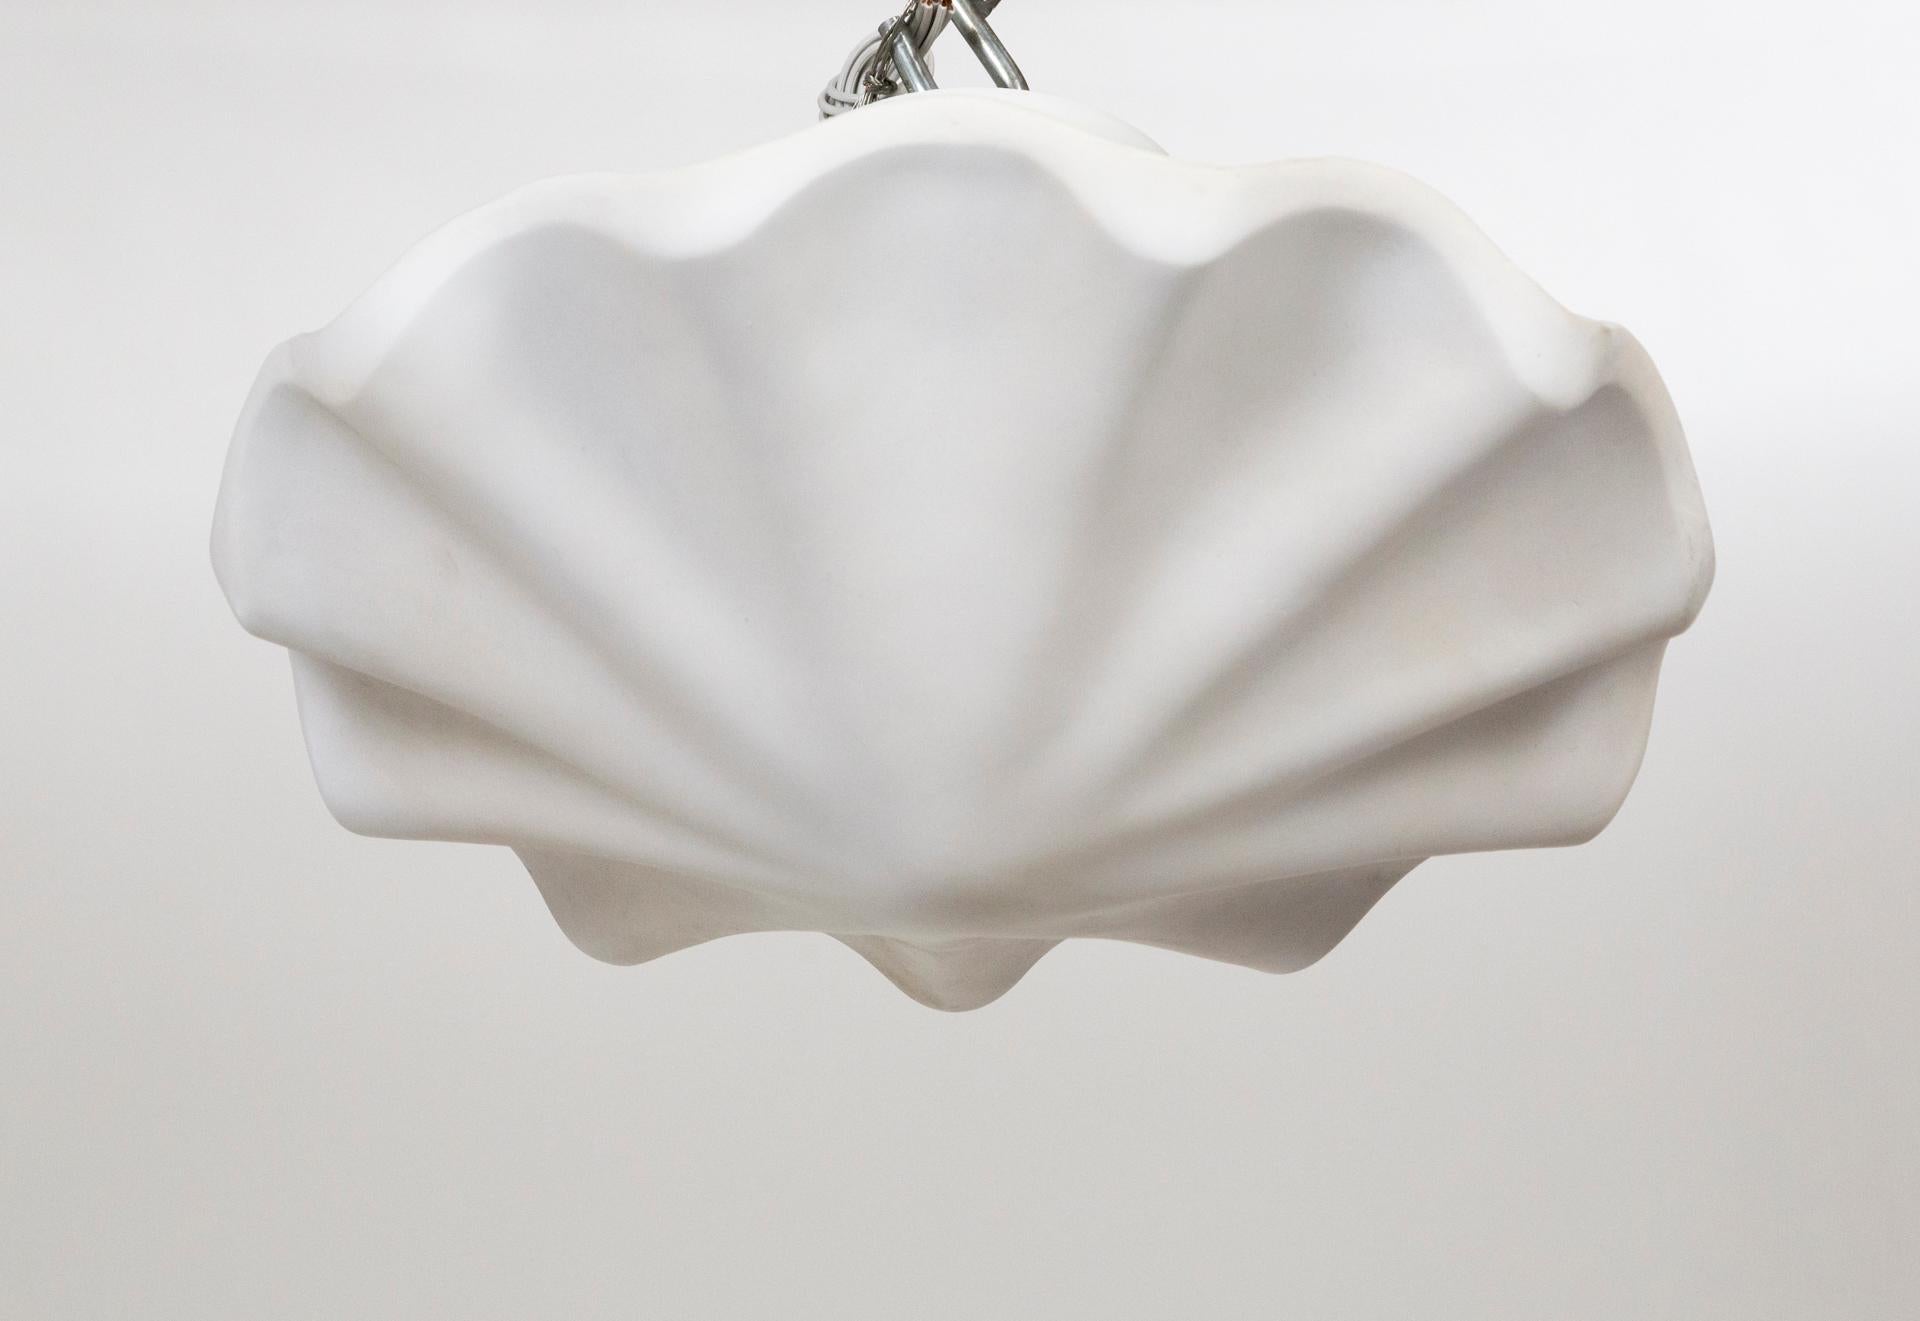 A plaster pendant in a smooth, undulating shell shape, with scalloped edges. A newer take on Francis Elkins's 1940s plaster plafonnier. Hanging by three white chains; with 3 medium base ceramic sockets. Contemporary; made from an original mold. We